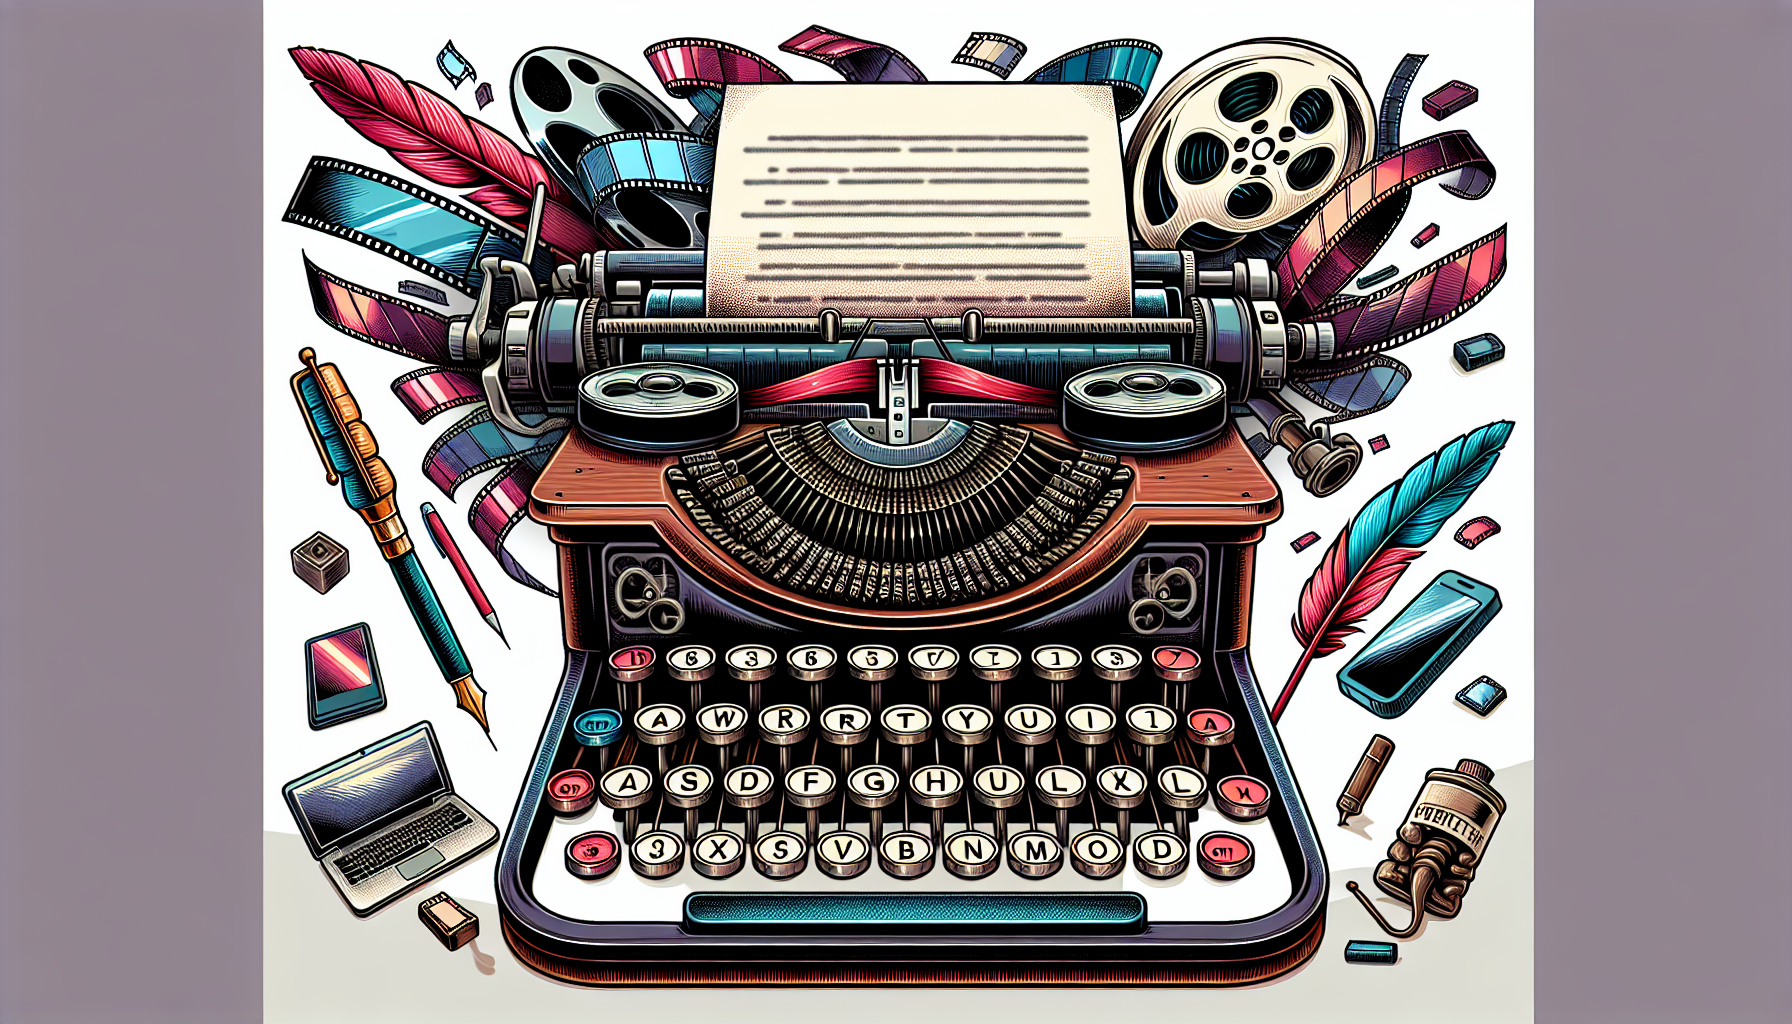 Here's a DALL-E prompt for an image related to this article:nnA stylized illustration of a typewriter with film reels emerging from it, transforming into a movie screen. The typewriter keys have screenplay terms like 'FADE IN' and 'CUT TO' instead of letters. A quill pen and a modern laptop hover nearby, symbolizing the evolution of screenwriting tools.